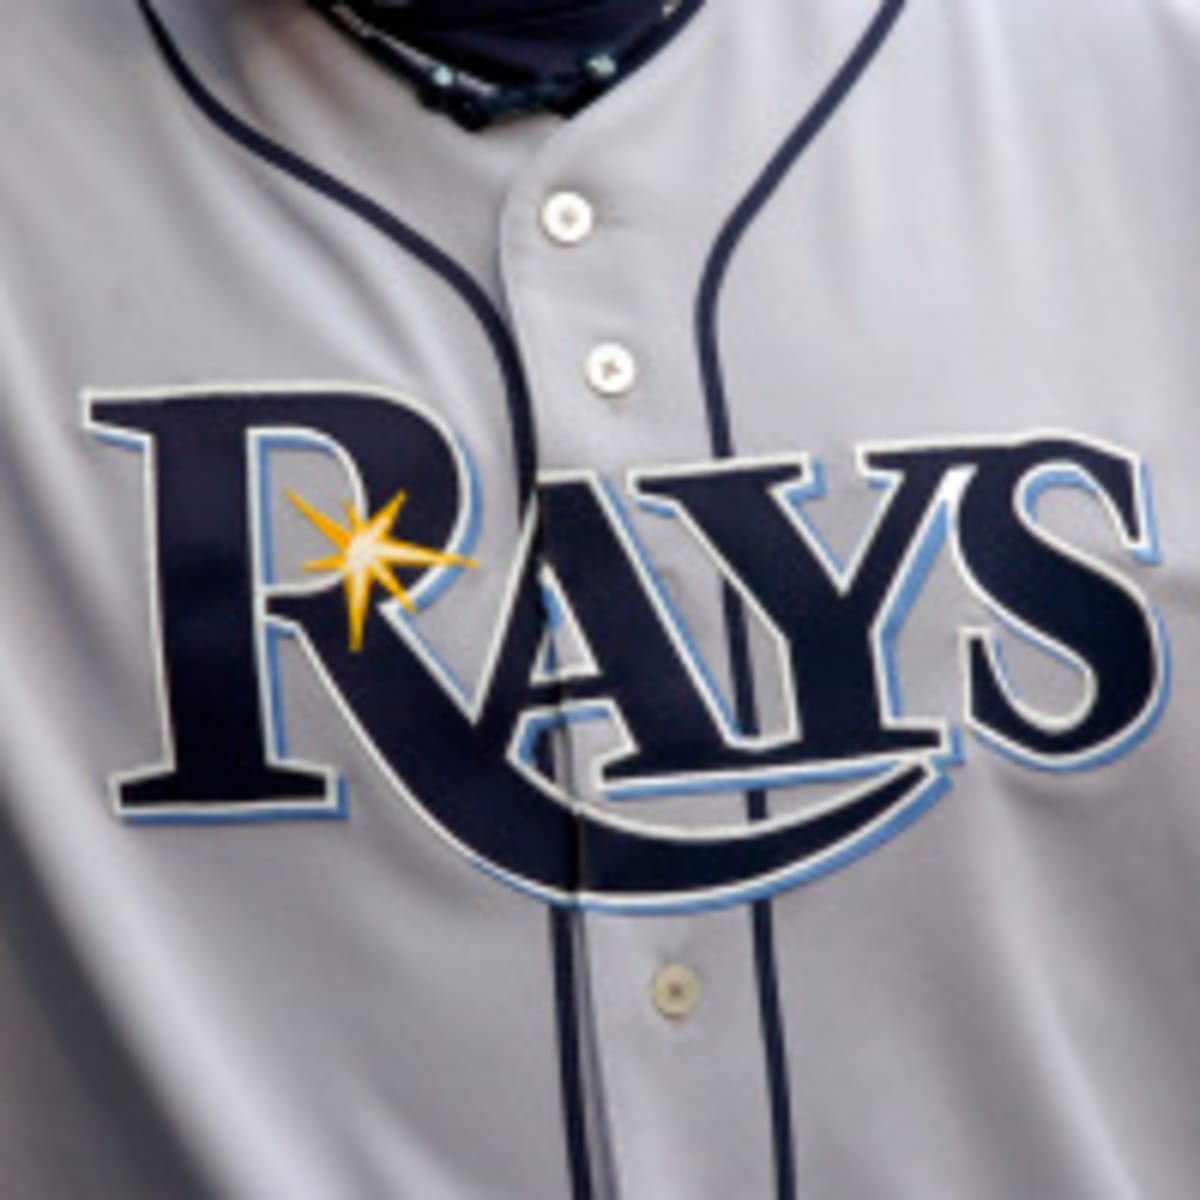 Tampa Bay Rays to debut faux back 1979 uniforms - Sports Illustrated